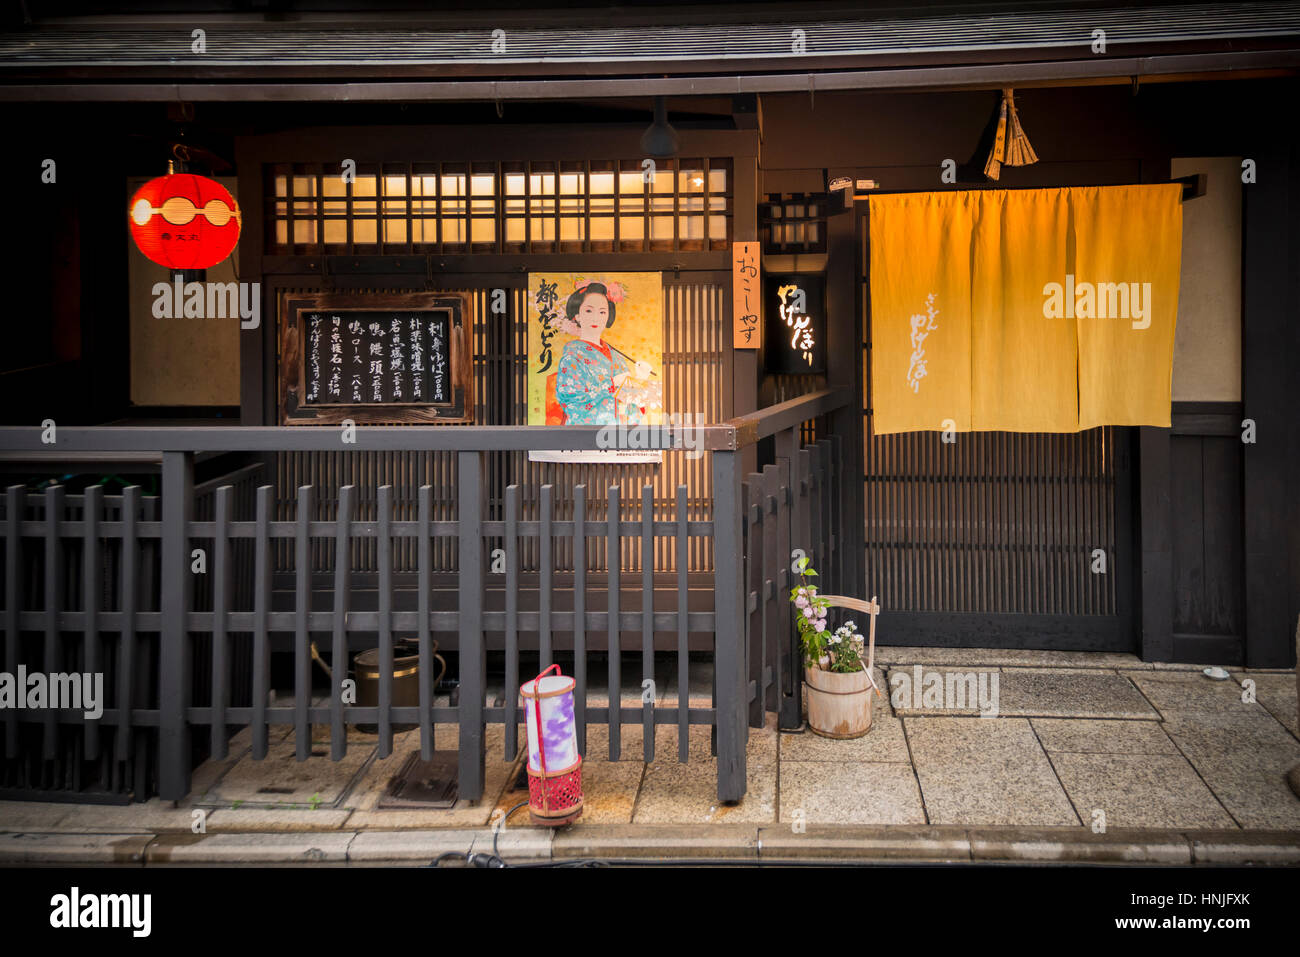 Frontage of a Japanese restaurant in Gion District, Kyoto, Japan Stock Photo